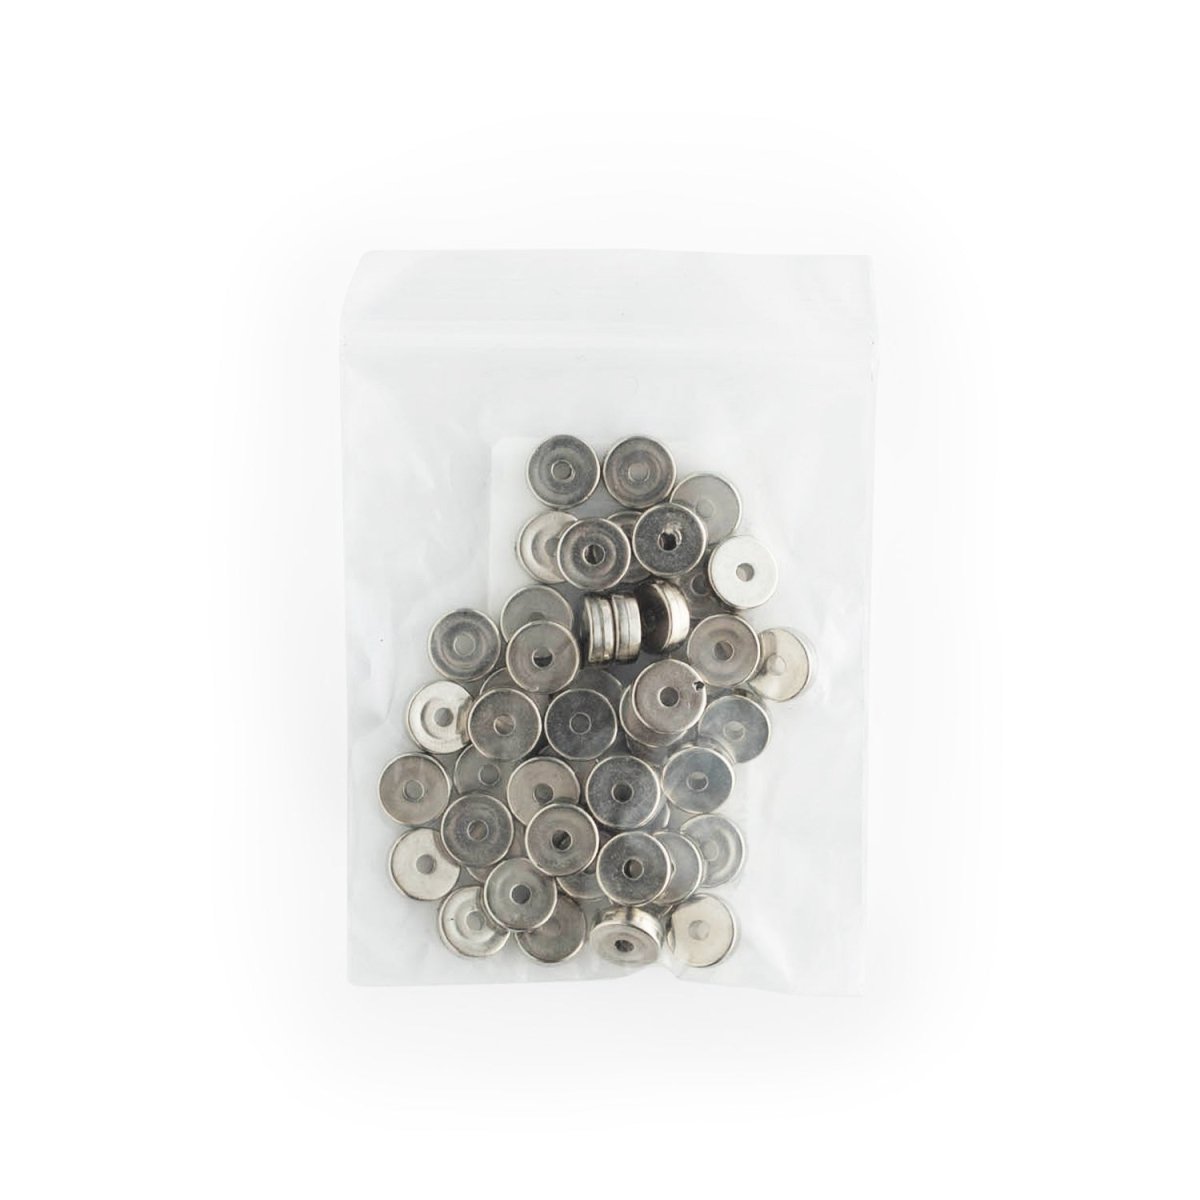 Spacer Beads Flat Disc 8mm Silver from Cara & Co Craft Supply